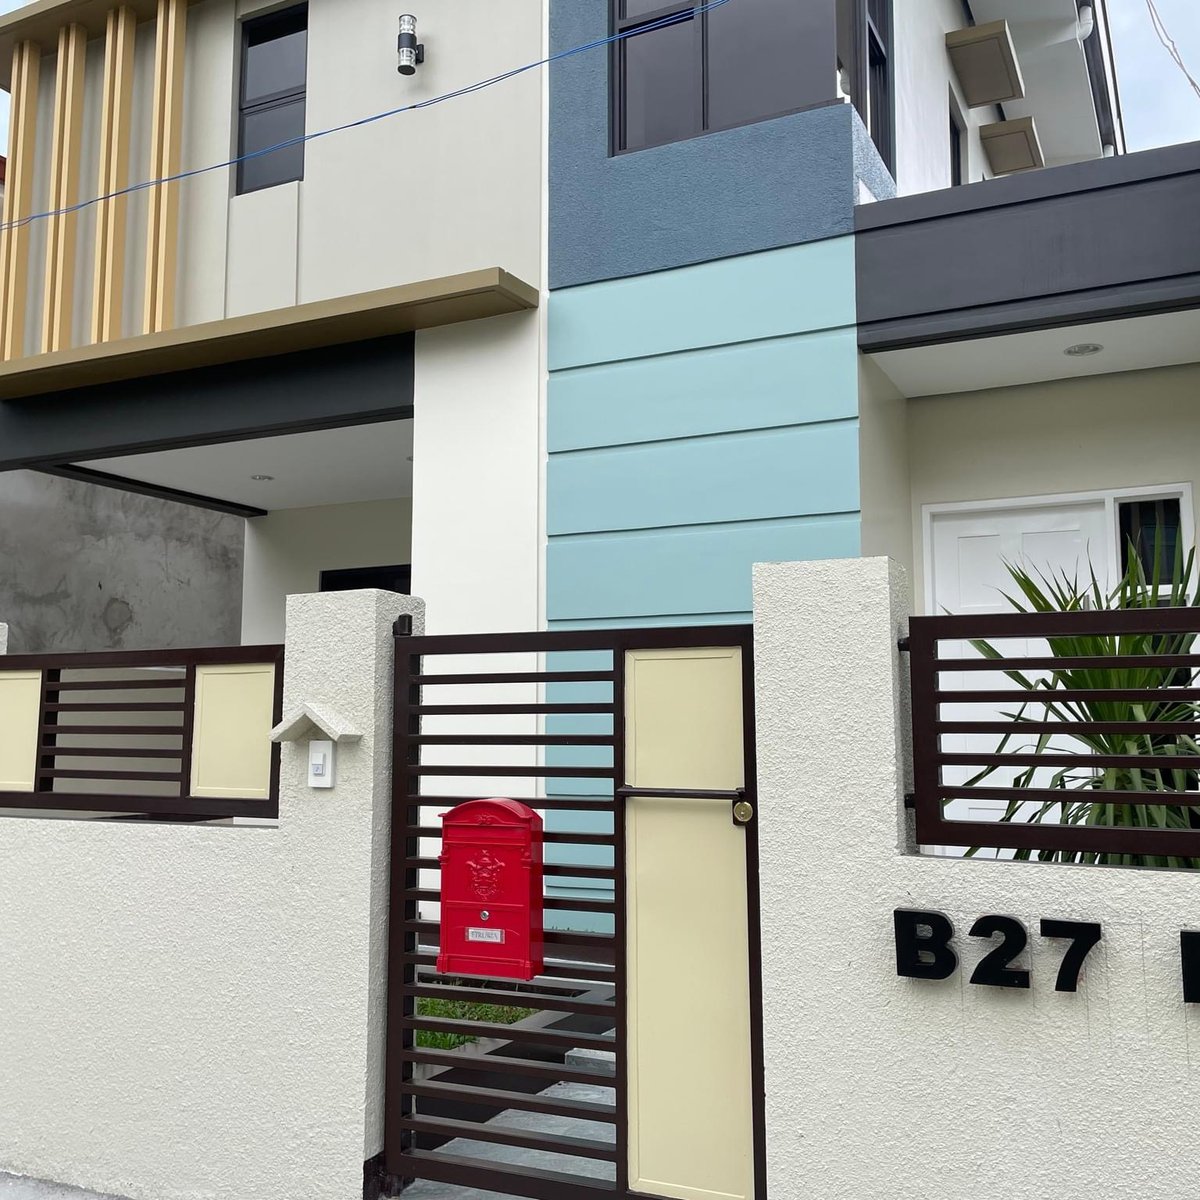 4-Bedroom Single Detached House and Lot For Sale in Imus Cavite